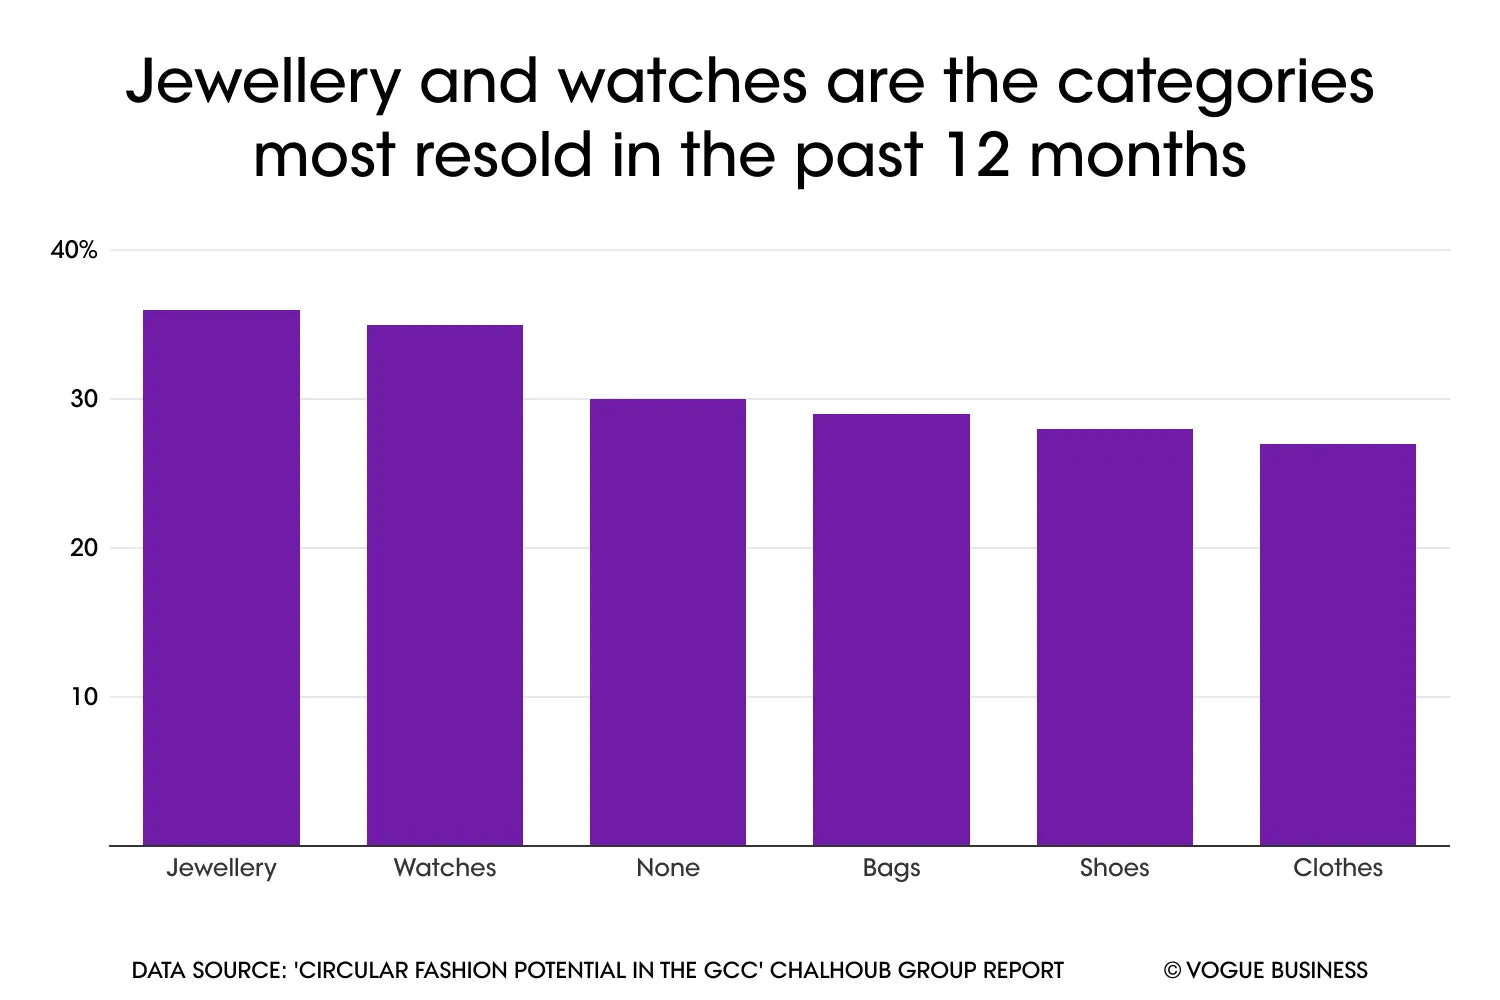 jewellery & watches are the categories most resold 12 months